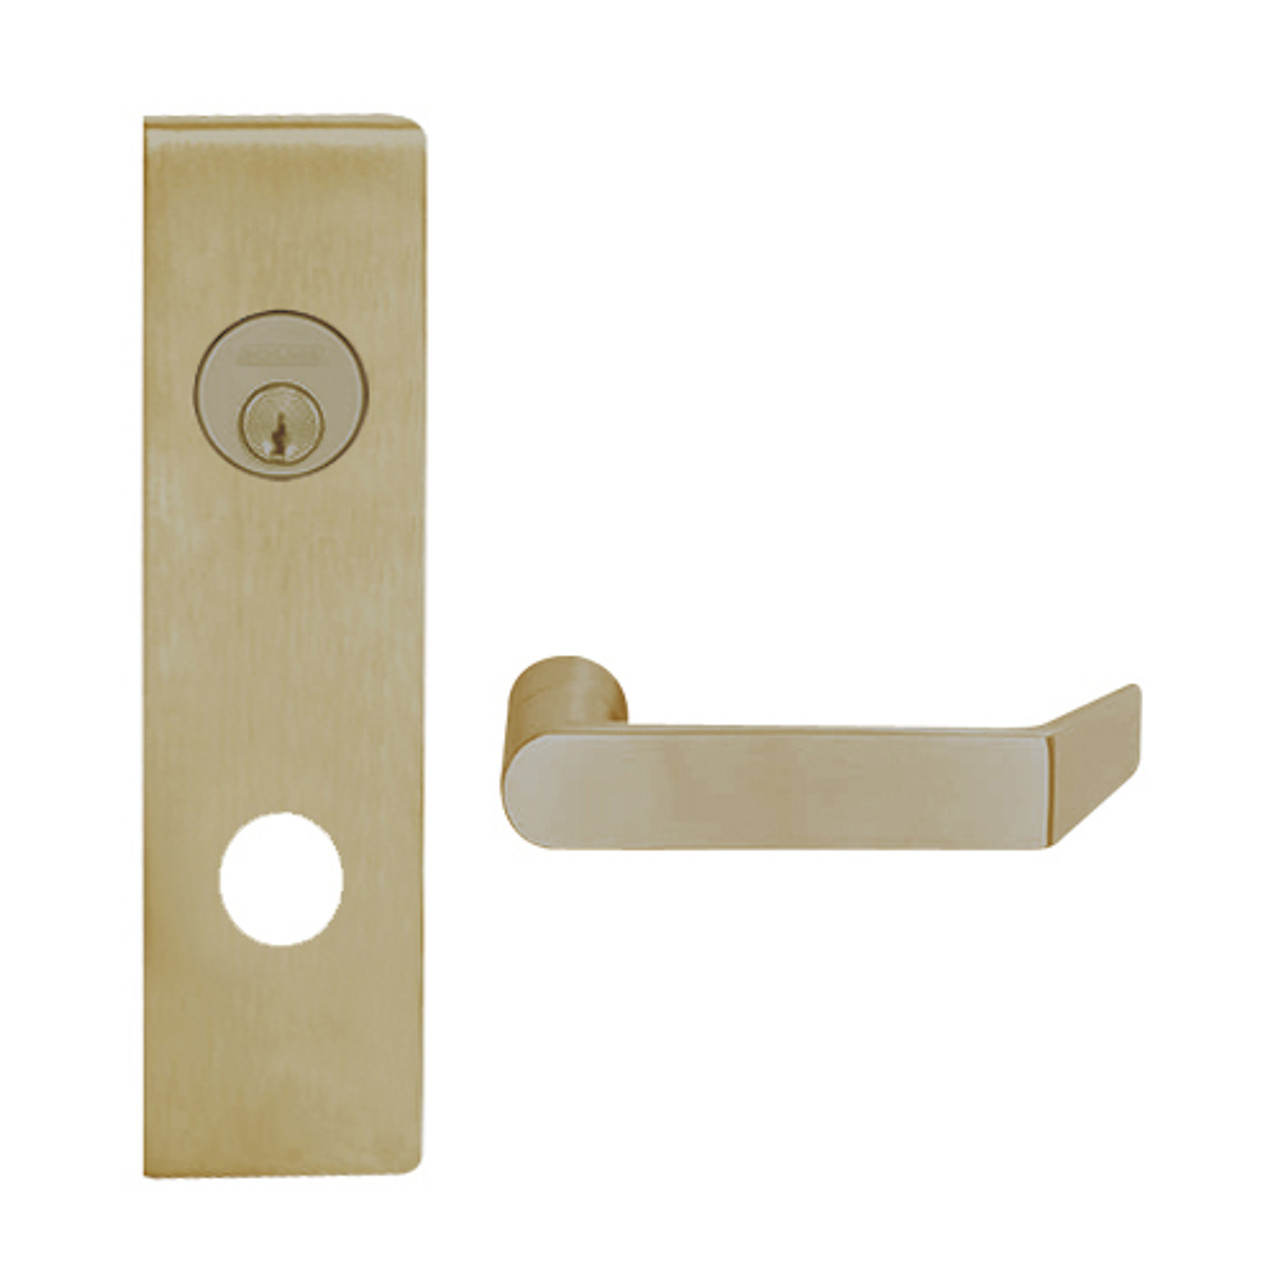 L9456P-06N-613 Schlage L Series Corridor with Deadbolt Commercial Mortise Lock with 06 Cast Lever Design in Oil Rubbed Bronze